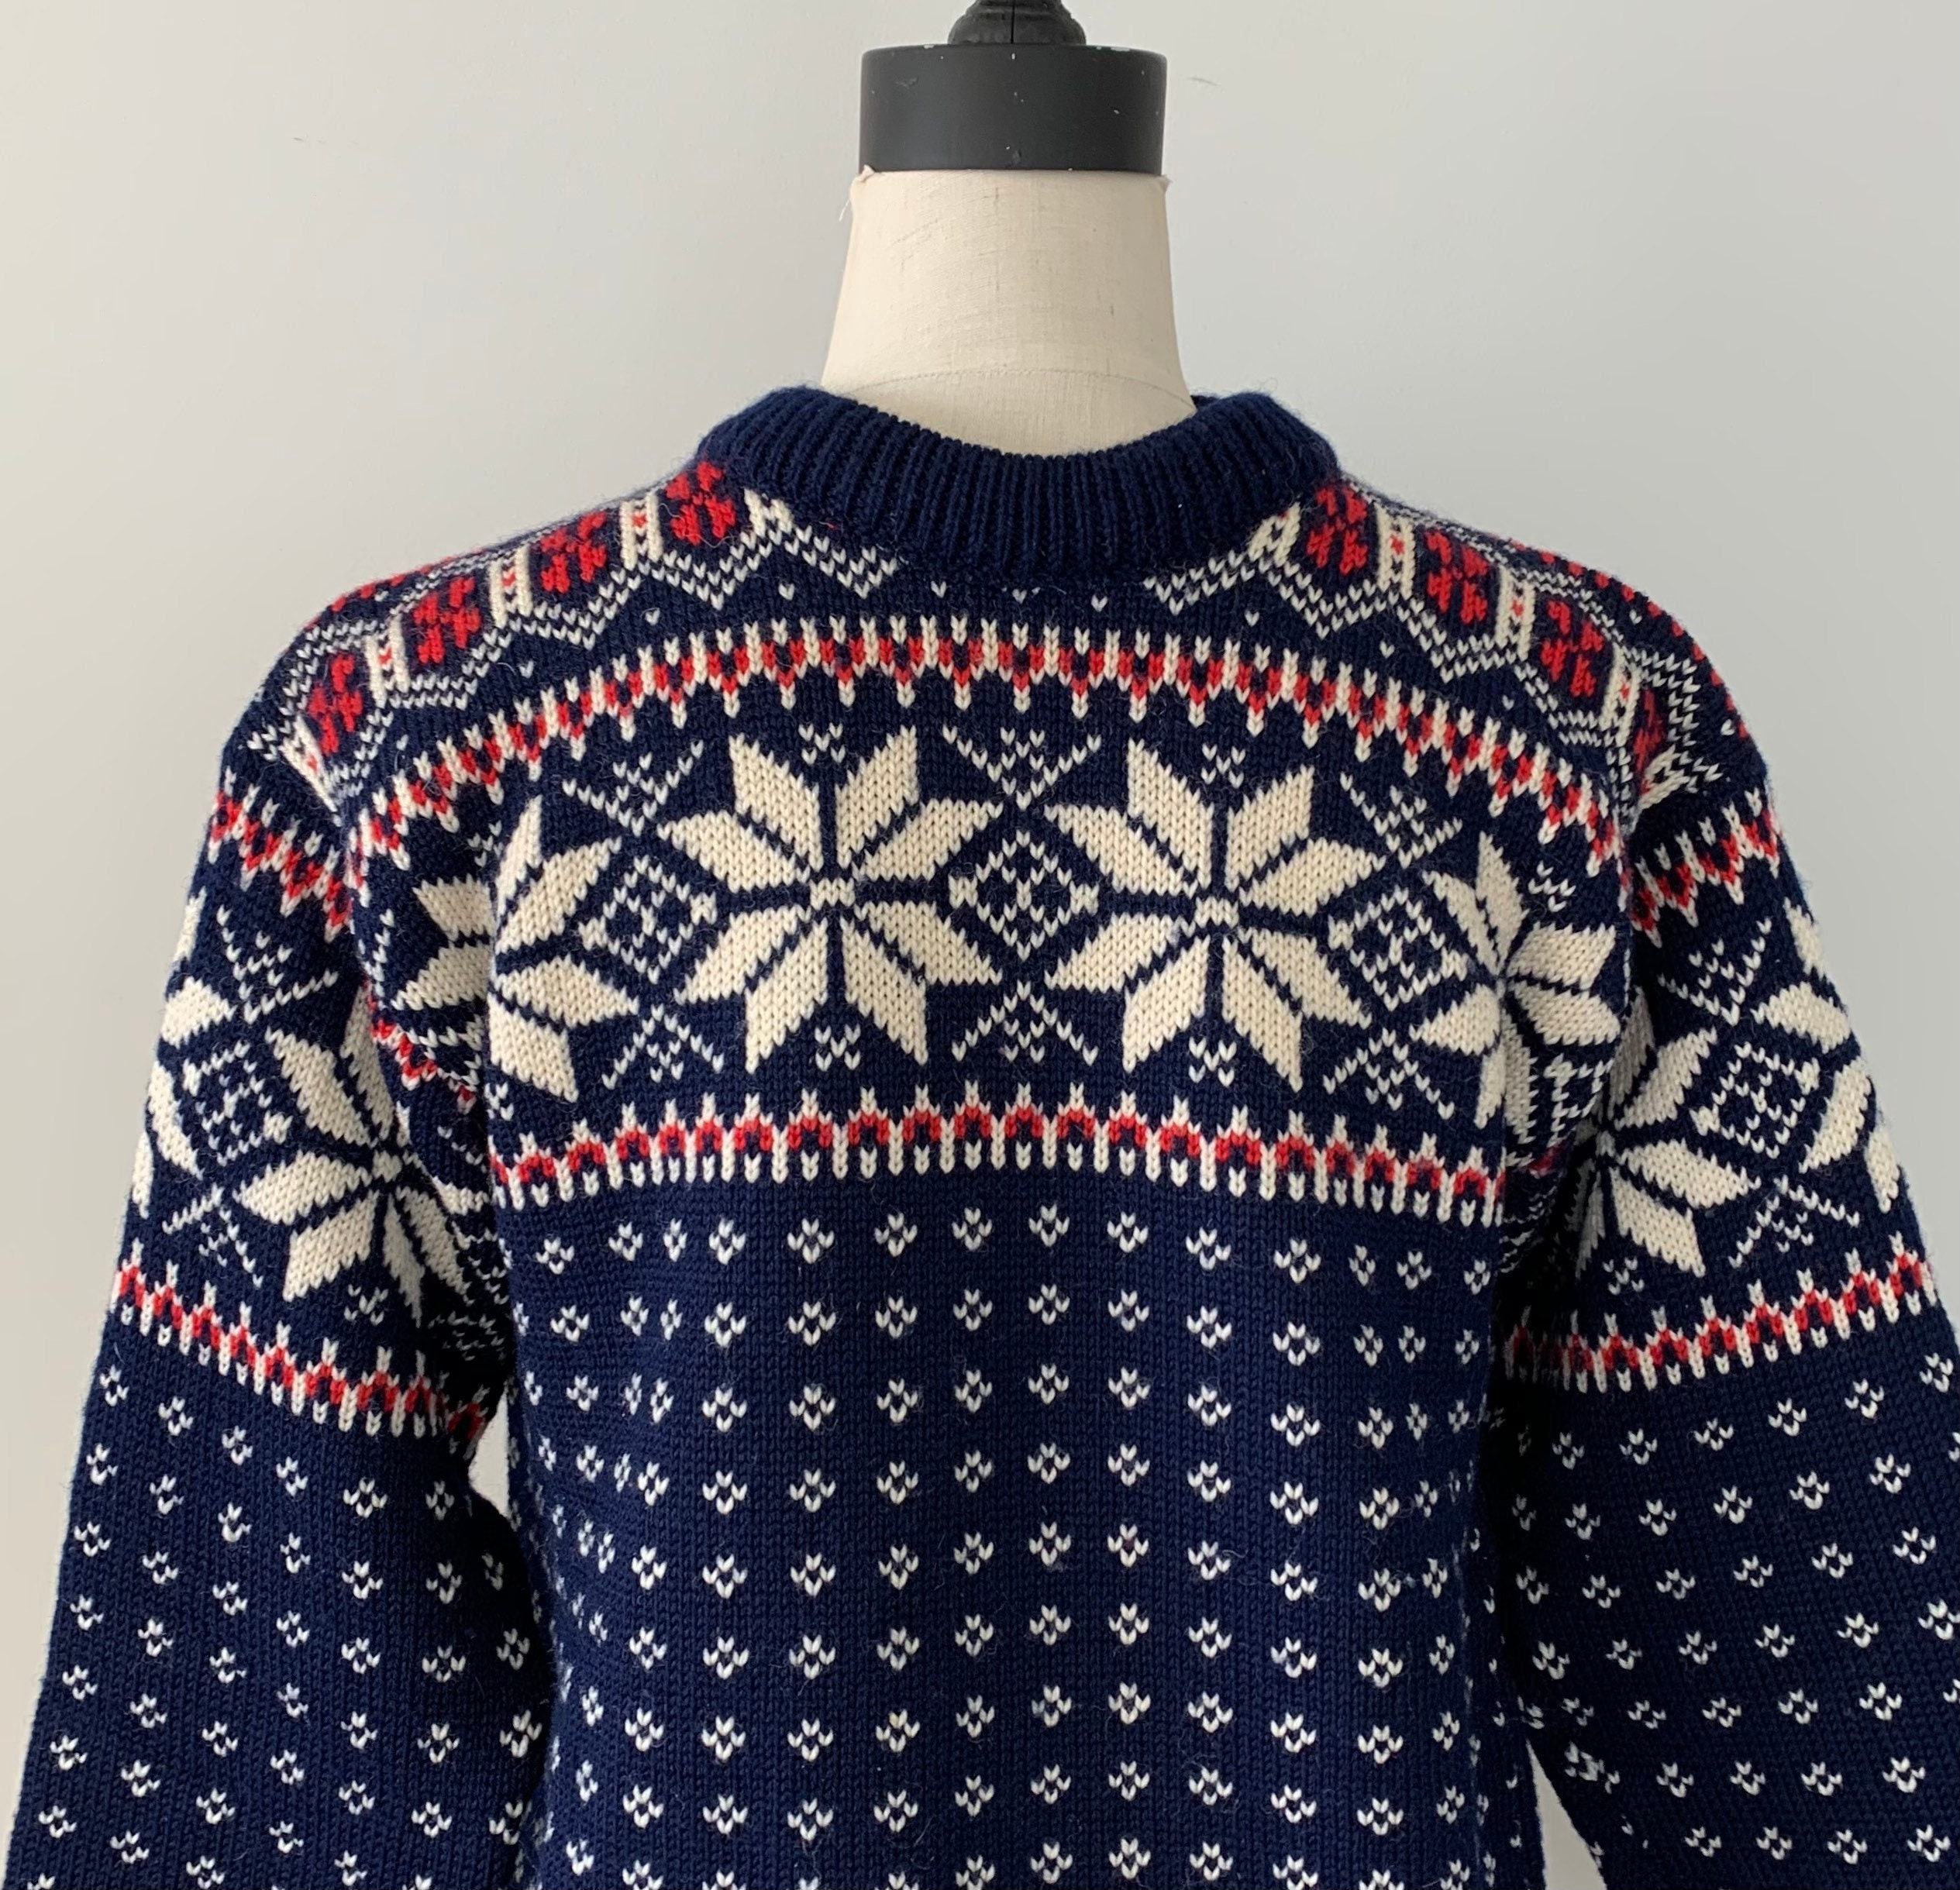 The Sweater Shop - Etsy